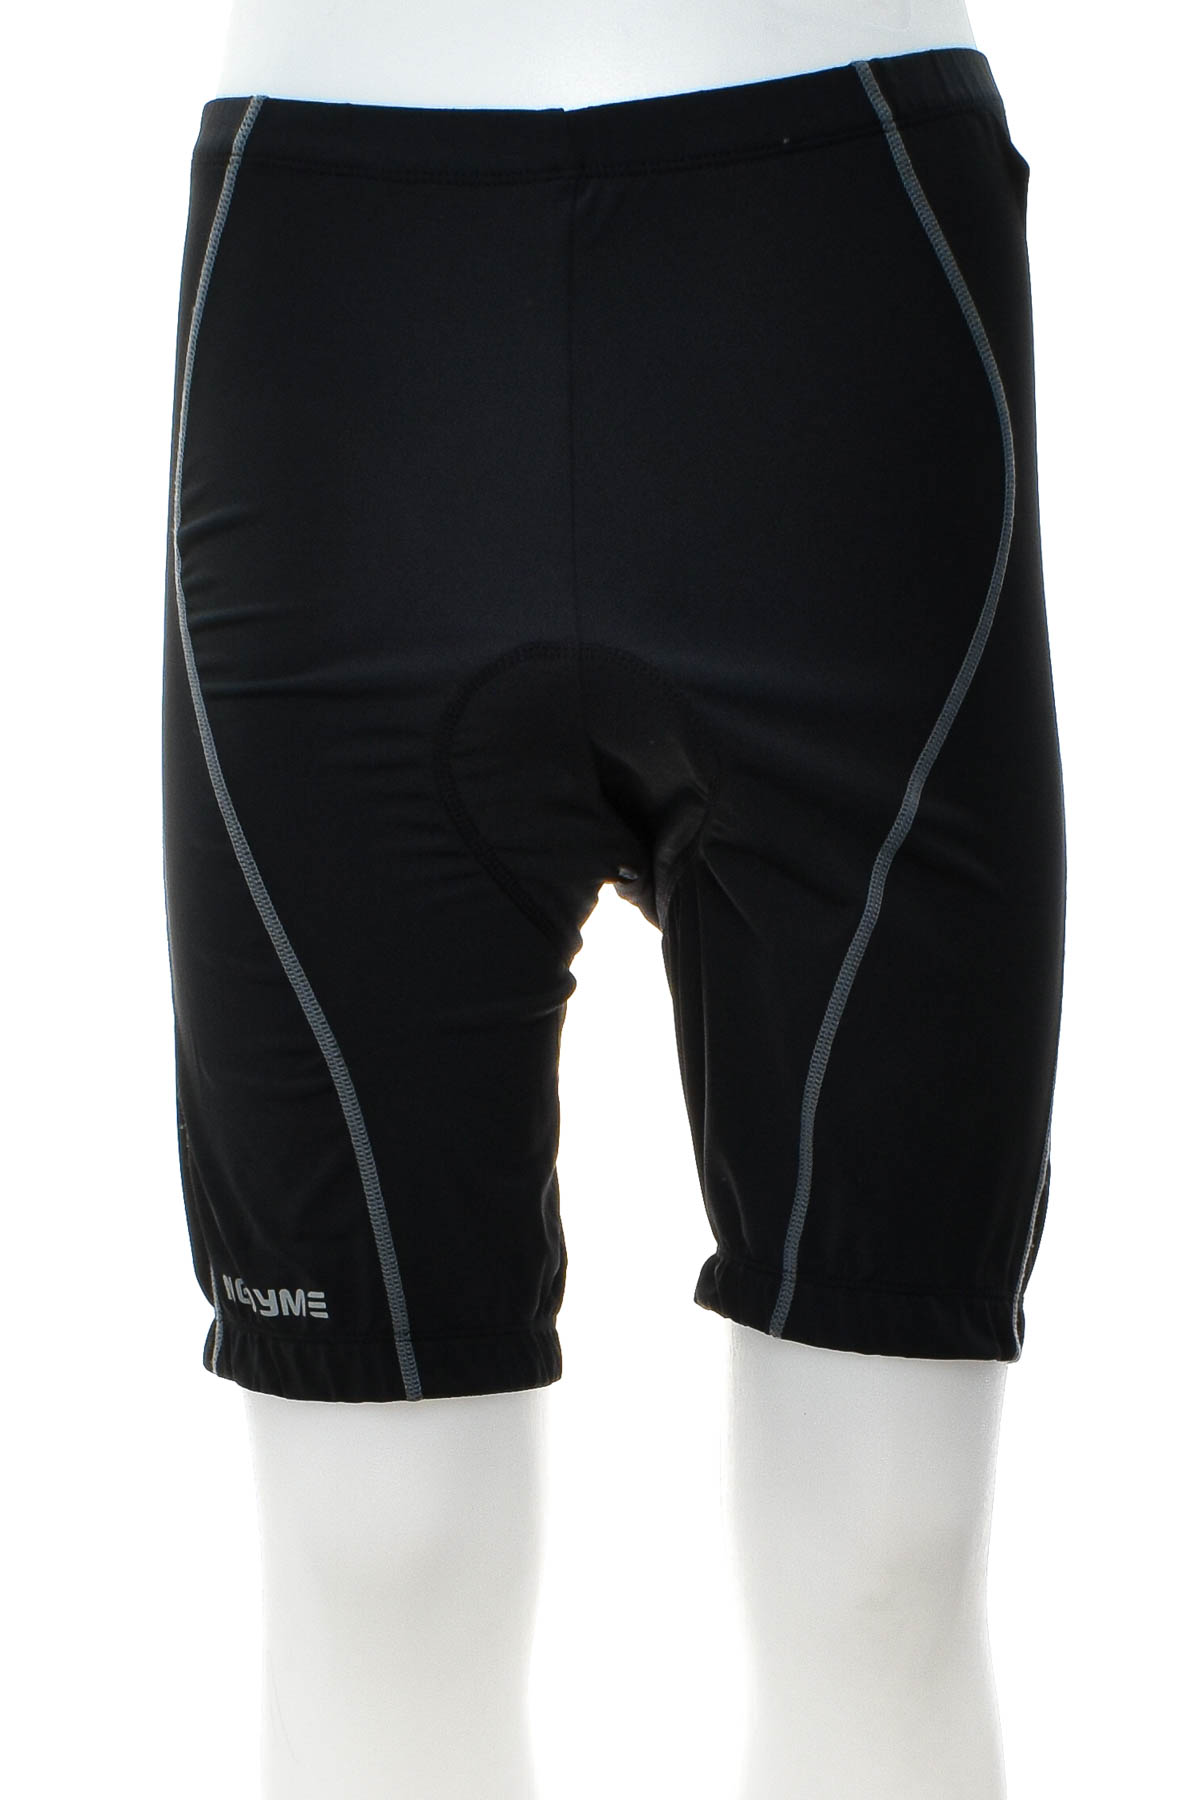 Men's shorts for cycling - NOOYME - 0